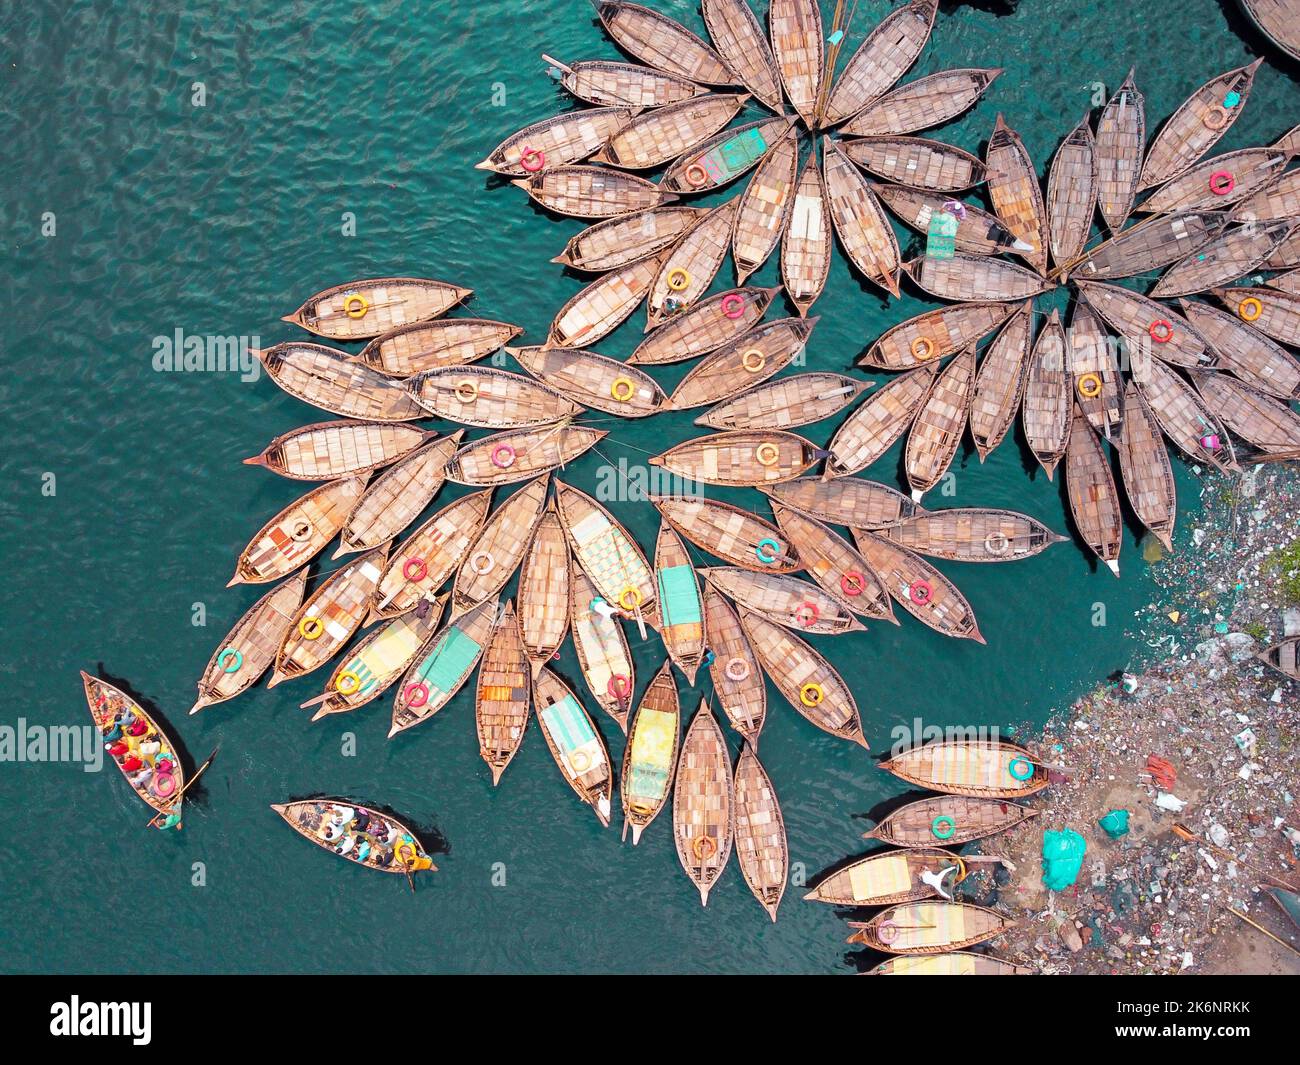 Hundreds of wooden boats fan out around their moorings in patterns which look like the petals of flower for a busy morning commute on Buriganga river. Stock Photo